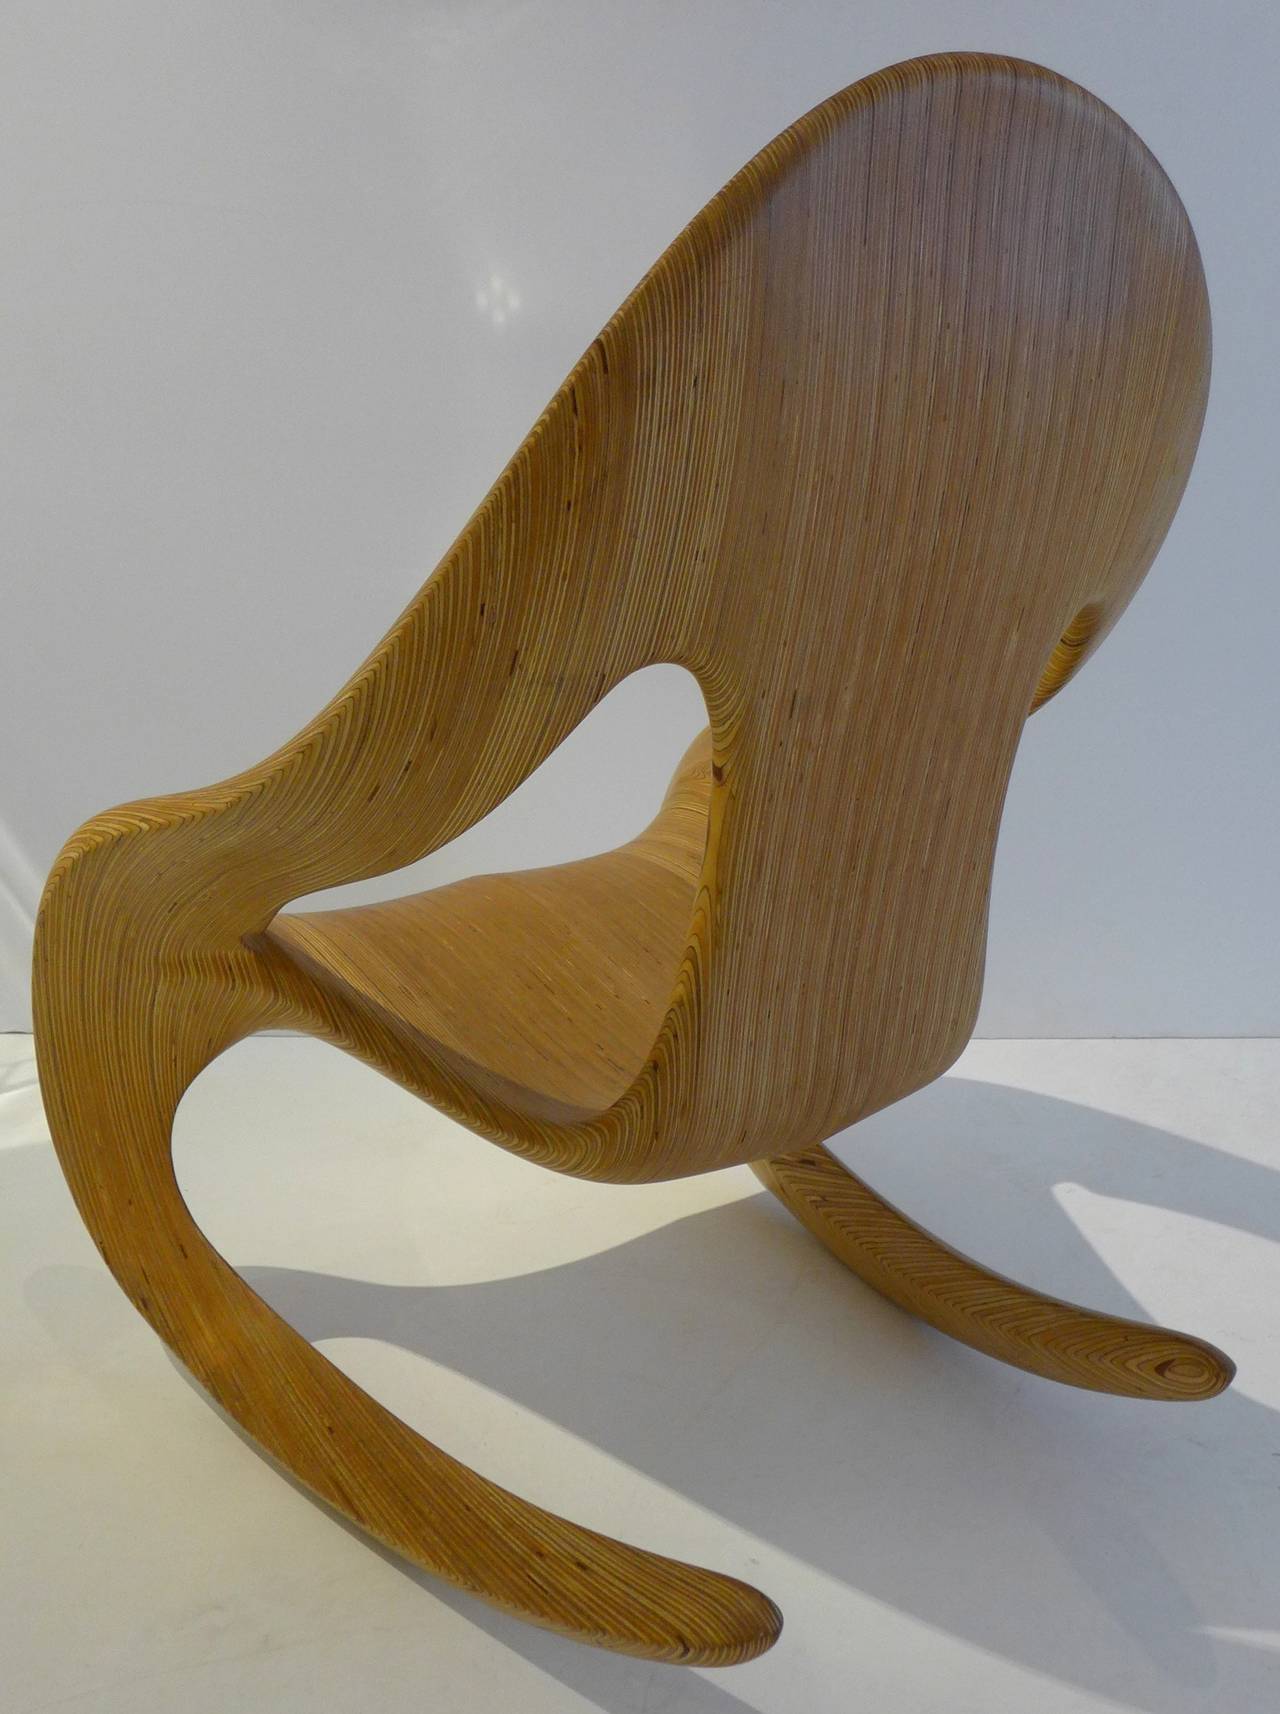 Laminated Sculptural Craft Rocking Chair by Carl Gromoll